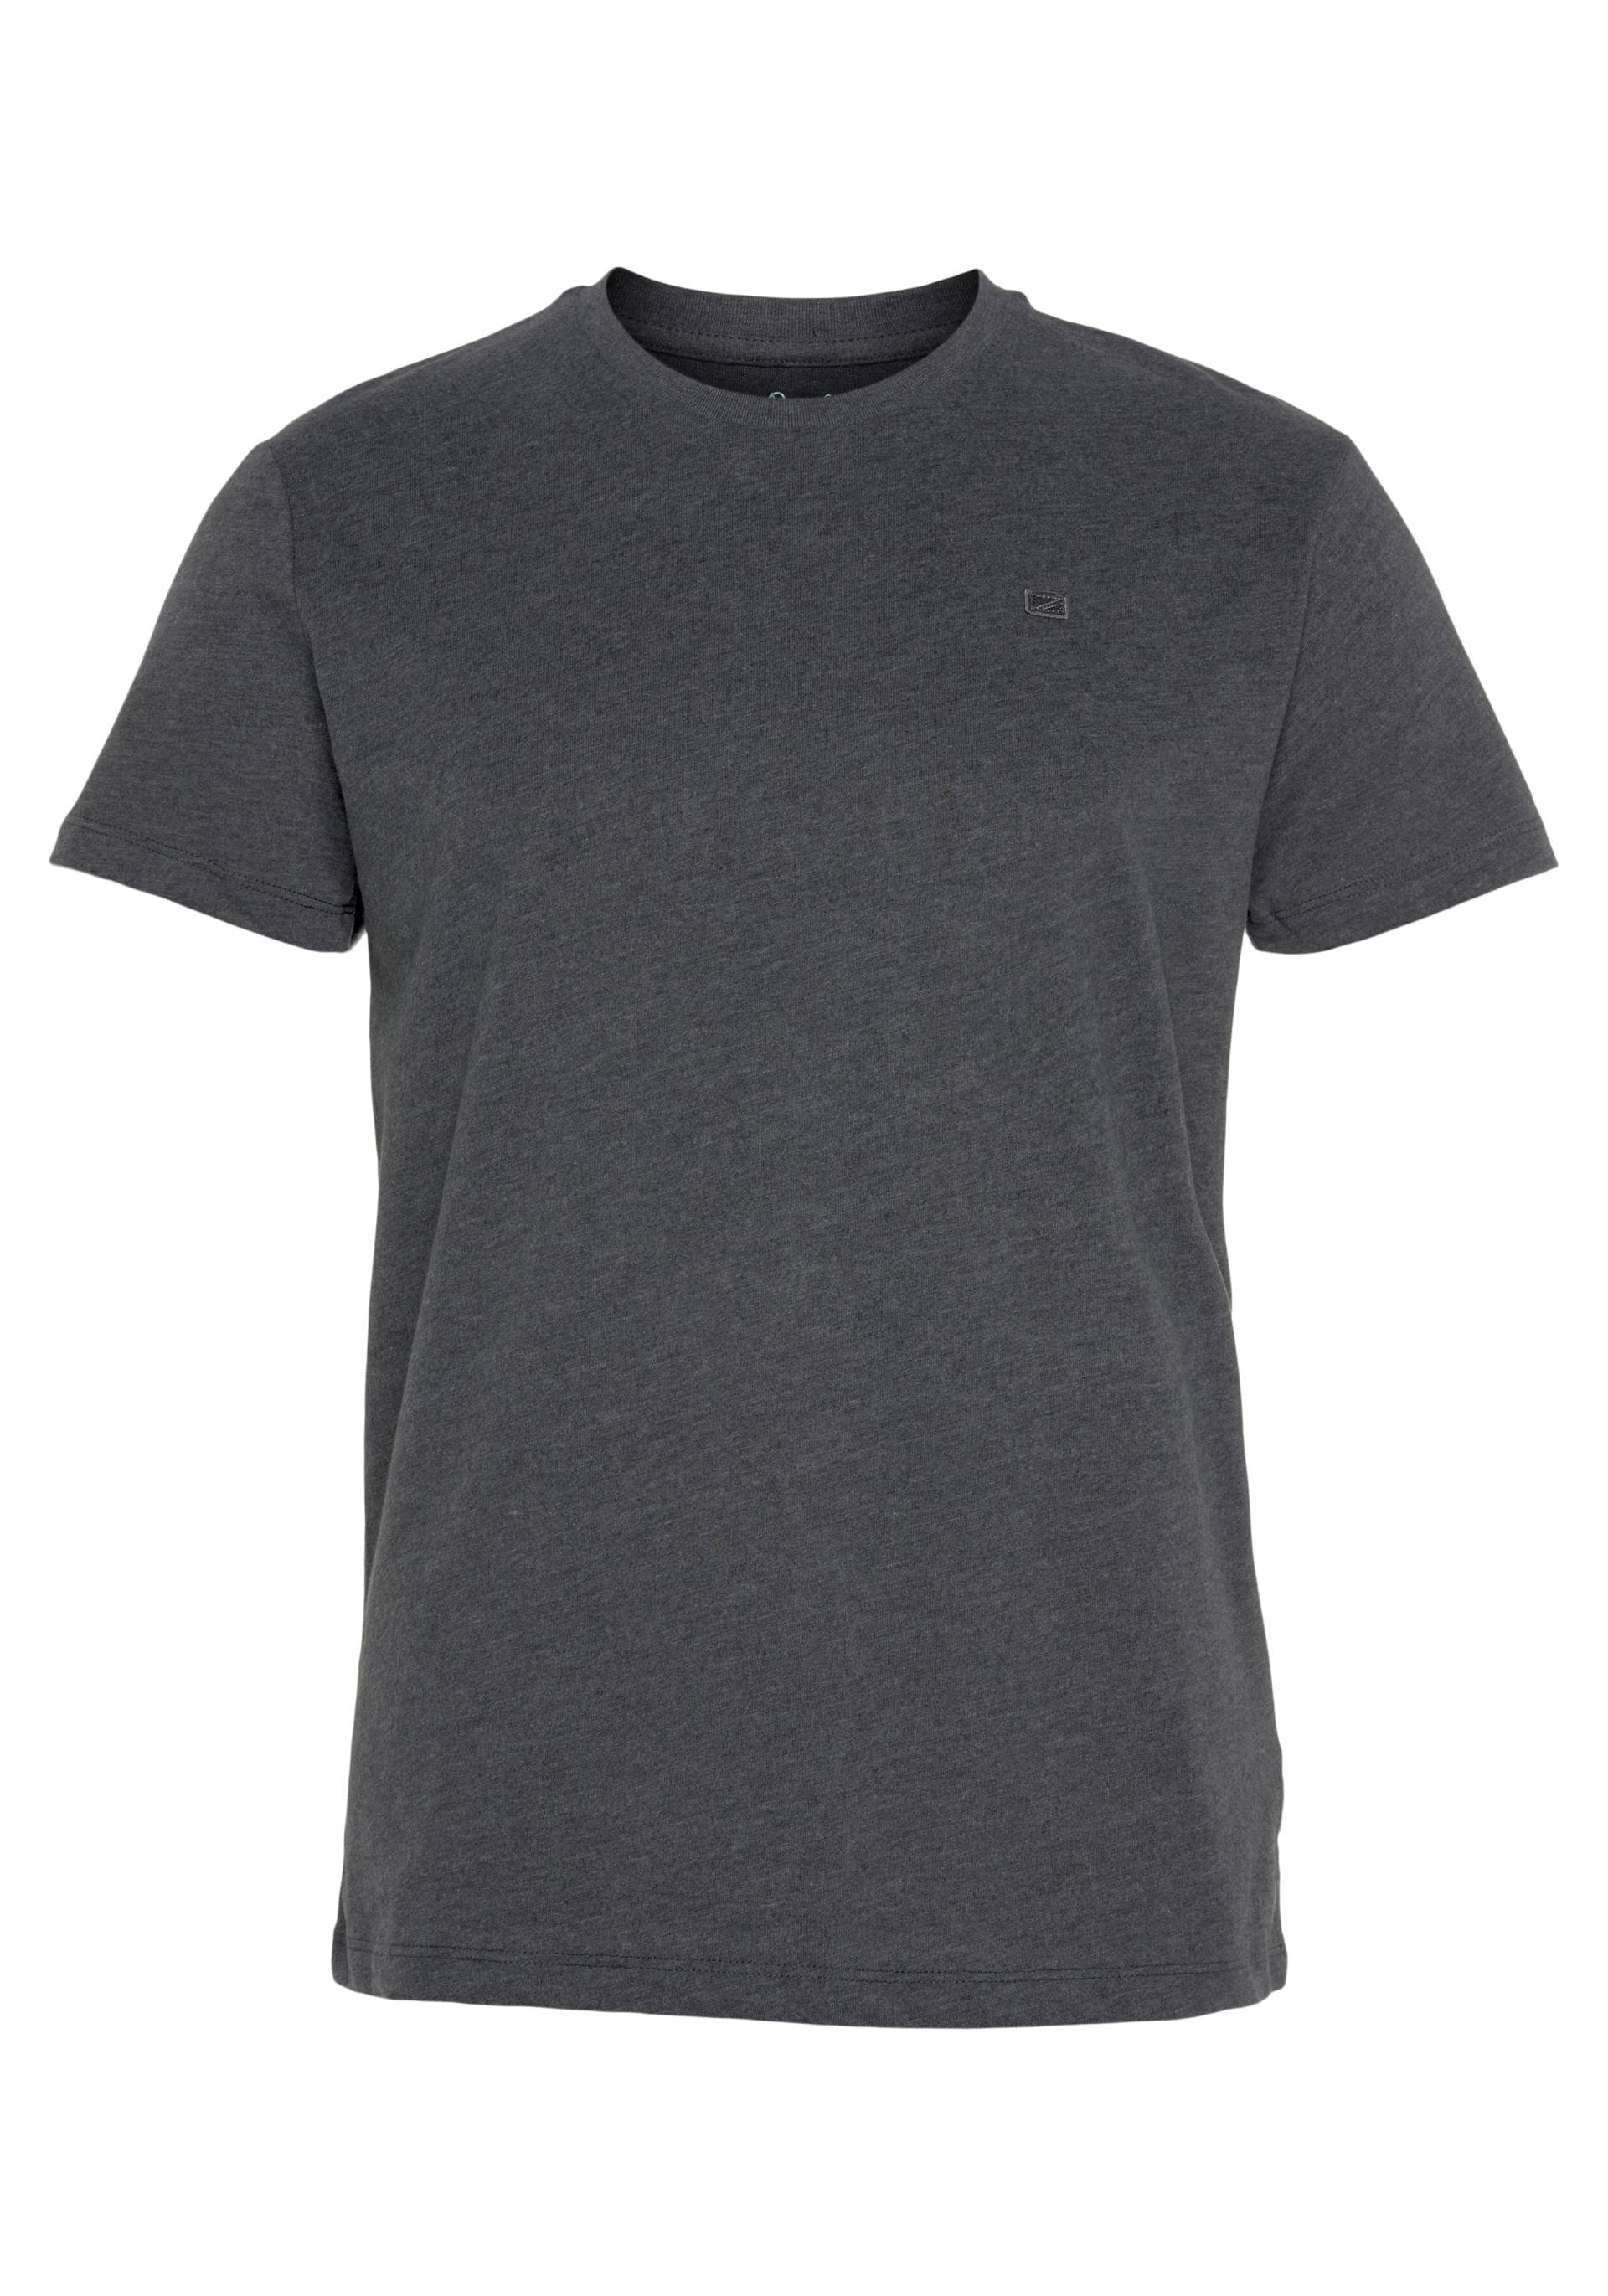 Pepe Jeans T-Shirt »Cooper« von Pepe Jeans